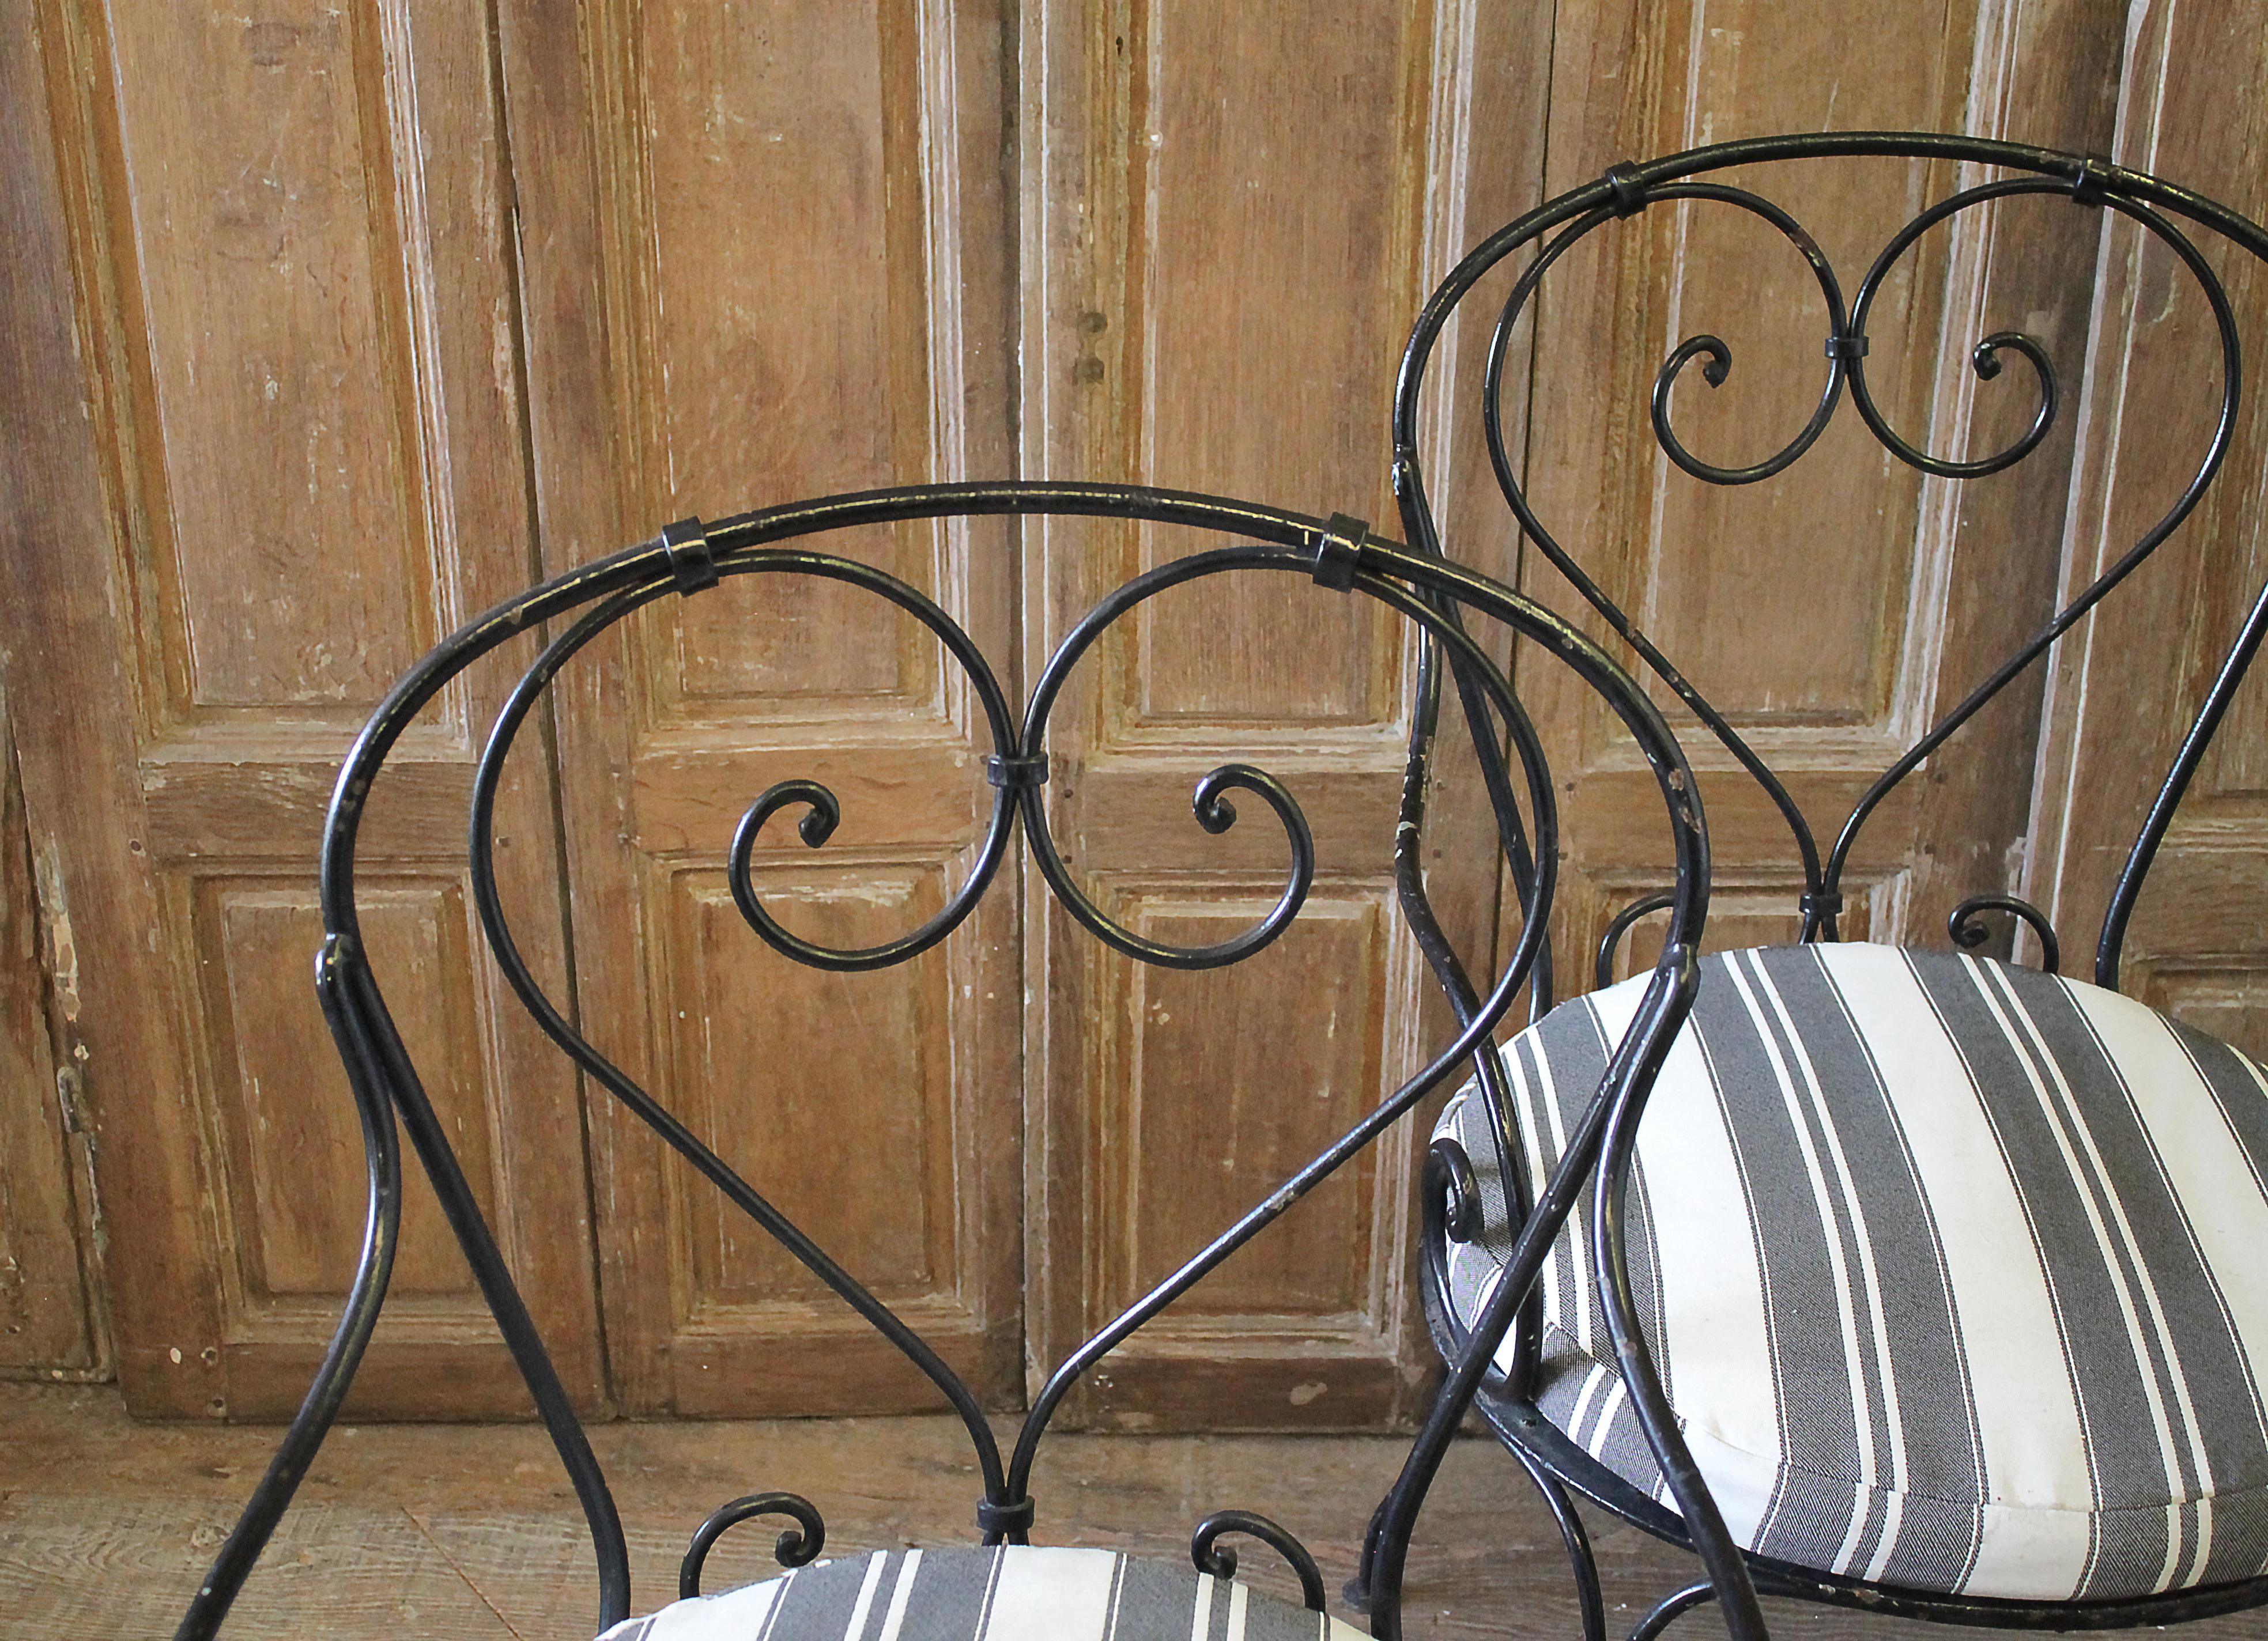 Set of 4 French iron bistro armchairs with outdoor cushions.
Measures:
23